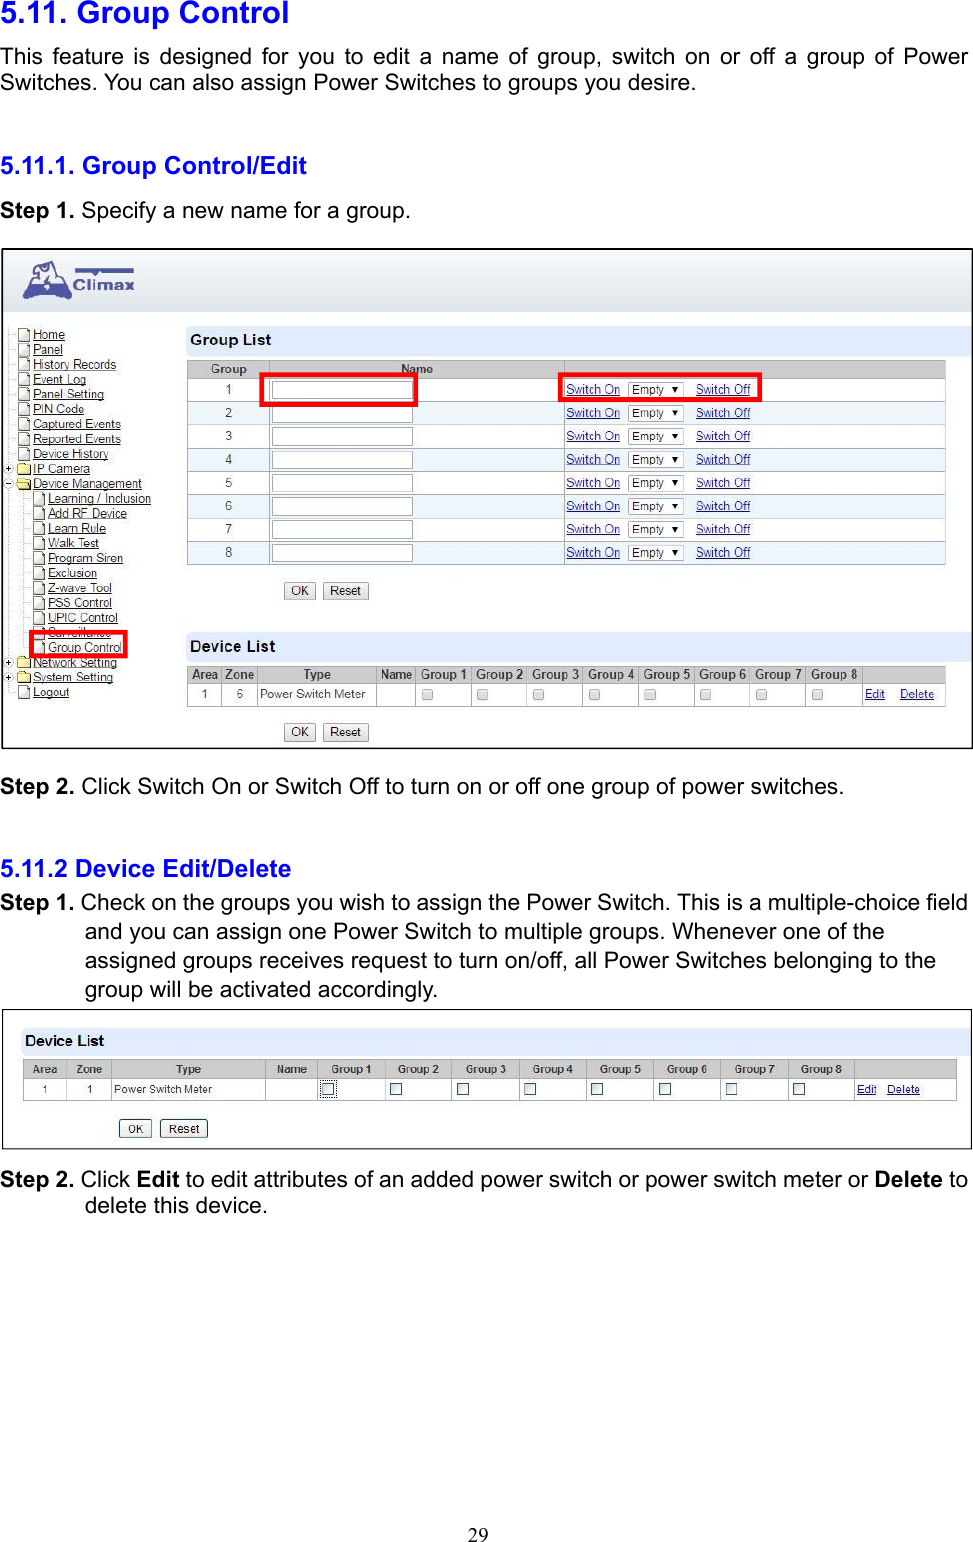  295.11. Group Control   This  feature  is  designed  for  you  to  edit  a  name  of  group,  switch on or off a group of Power Switches. You can also assign Power Switches to groups you desire.    5.11.1. Group Control/Edit     Step 1. Specify a new name for a group.        Step 2. Click Switch On or Switch Off to turn on or off one group of power switches.    5.11.2 Device Edit/Delete   Step 1. Check on the groups you wish to assign the Power Switch. This is a multiple-choice field and you can assign one Power Switch to multiple groups. Whenever one of the assigned groups receives request to turn on/off, all Power Switches belonging to the group will be activated accordingly.    Step 2. Click Edit to edit attributes of an added power switch or power switch meter or Delete to delete this device.      